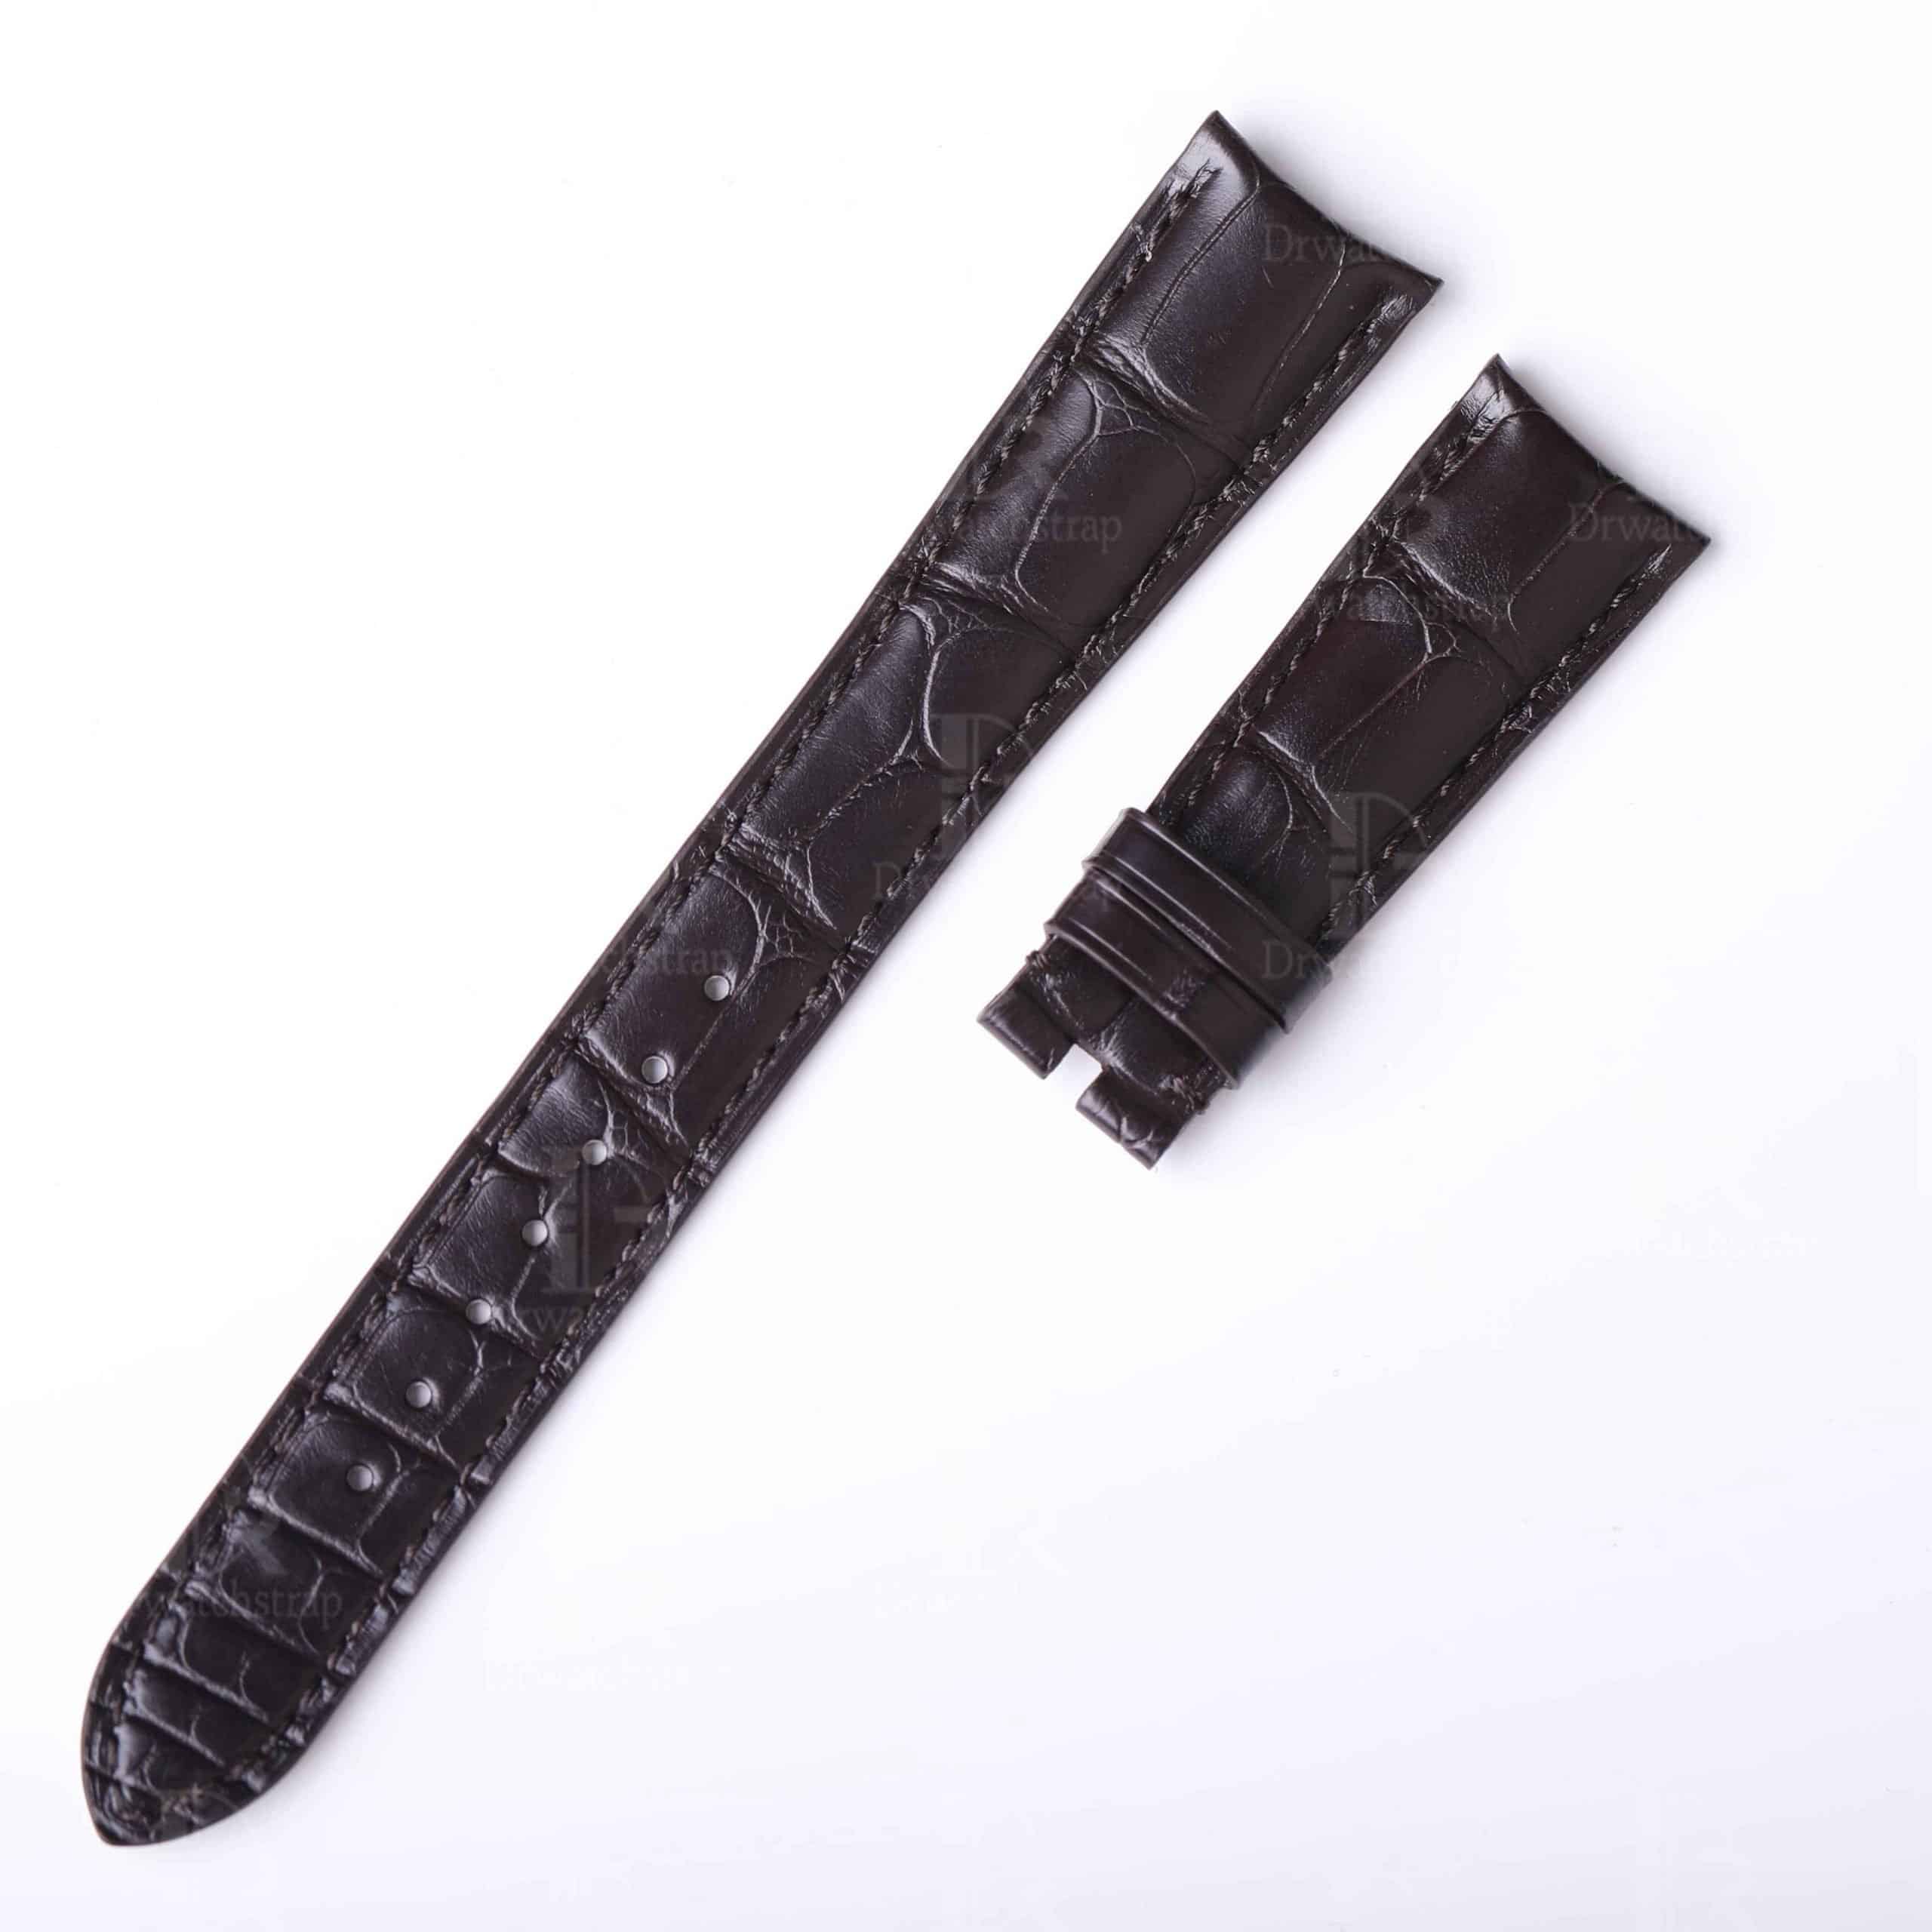 Custom High-end best quality Belly-scale alligator crocodile black curved end leather watch band and watch strap replacement for Rolex Cellini Moonphase 20mm watches - Shop Rolex leather watch straps online at a low price